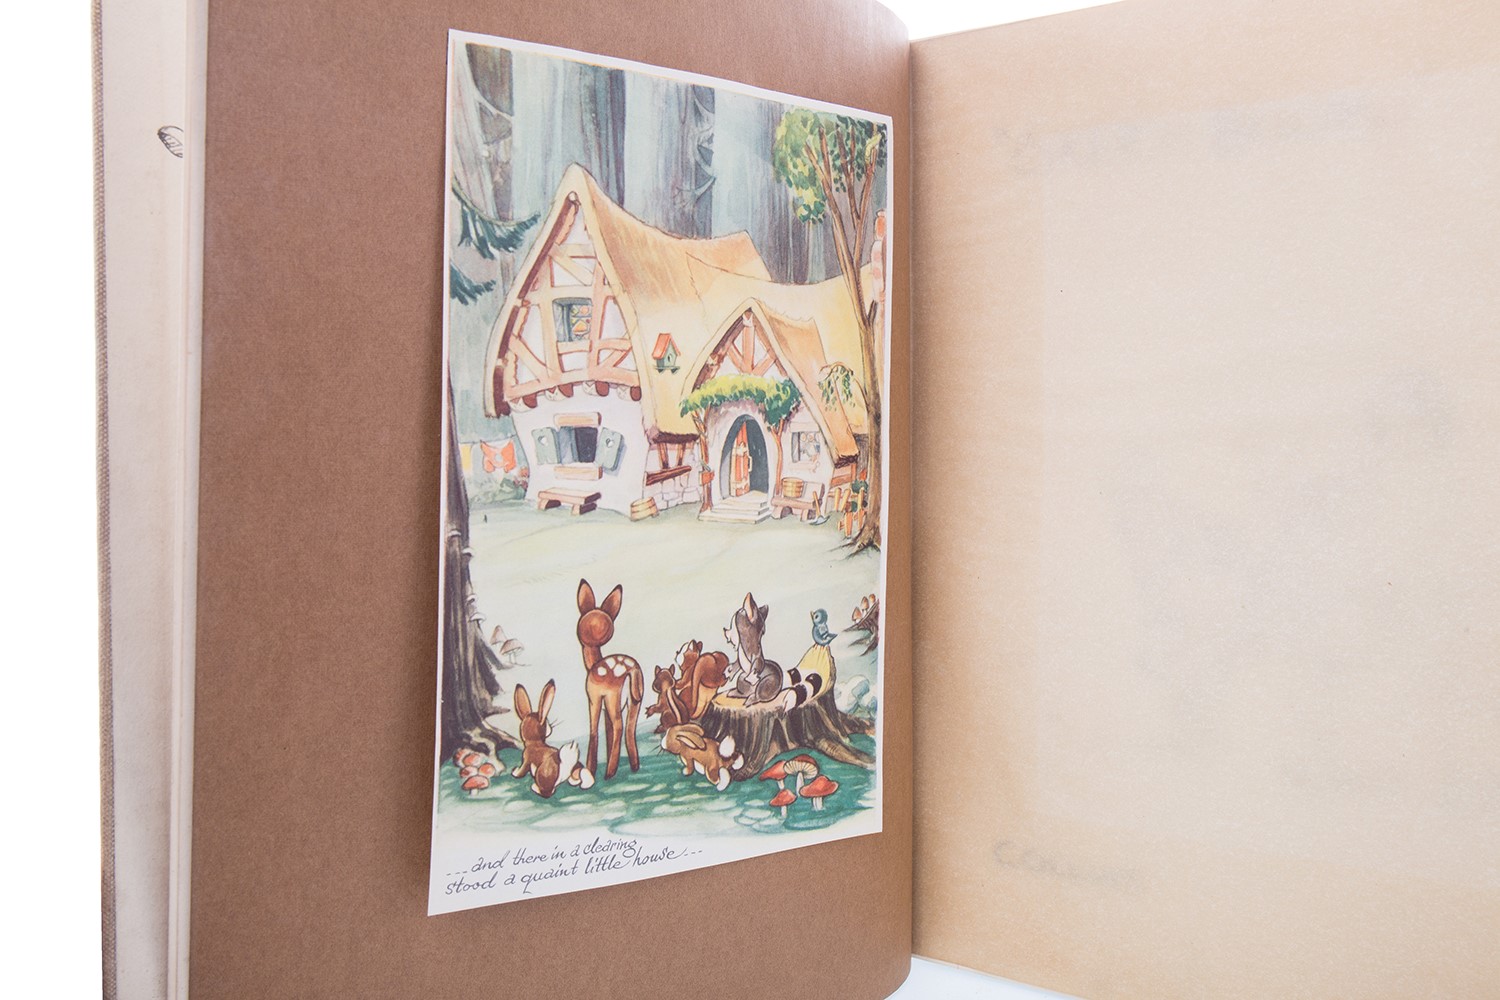 WALT DISNEY 'SKETCH BOOK' printed and bound by Wm. Collins, Sons & Co. - Image 6 of 18